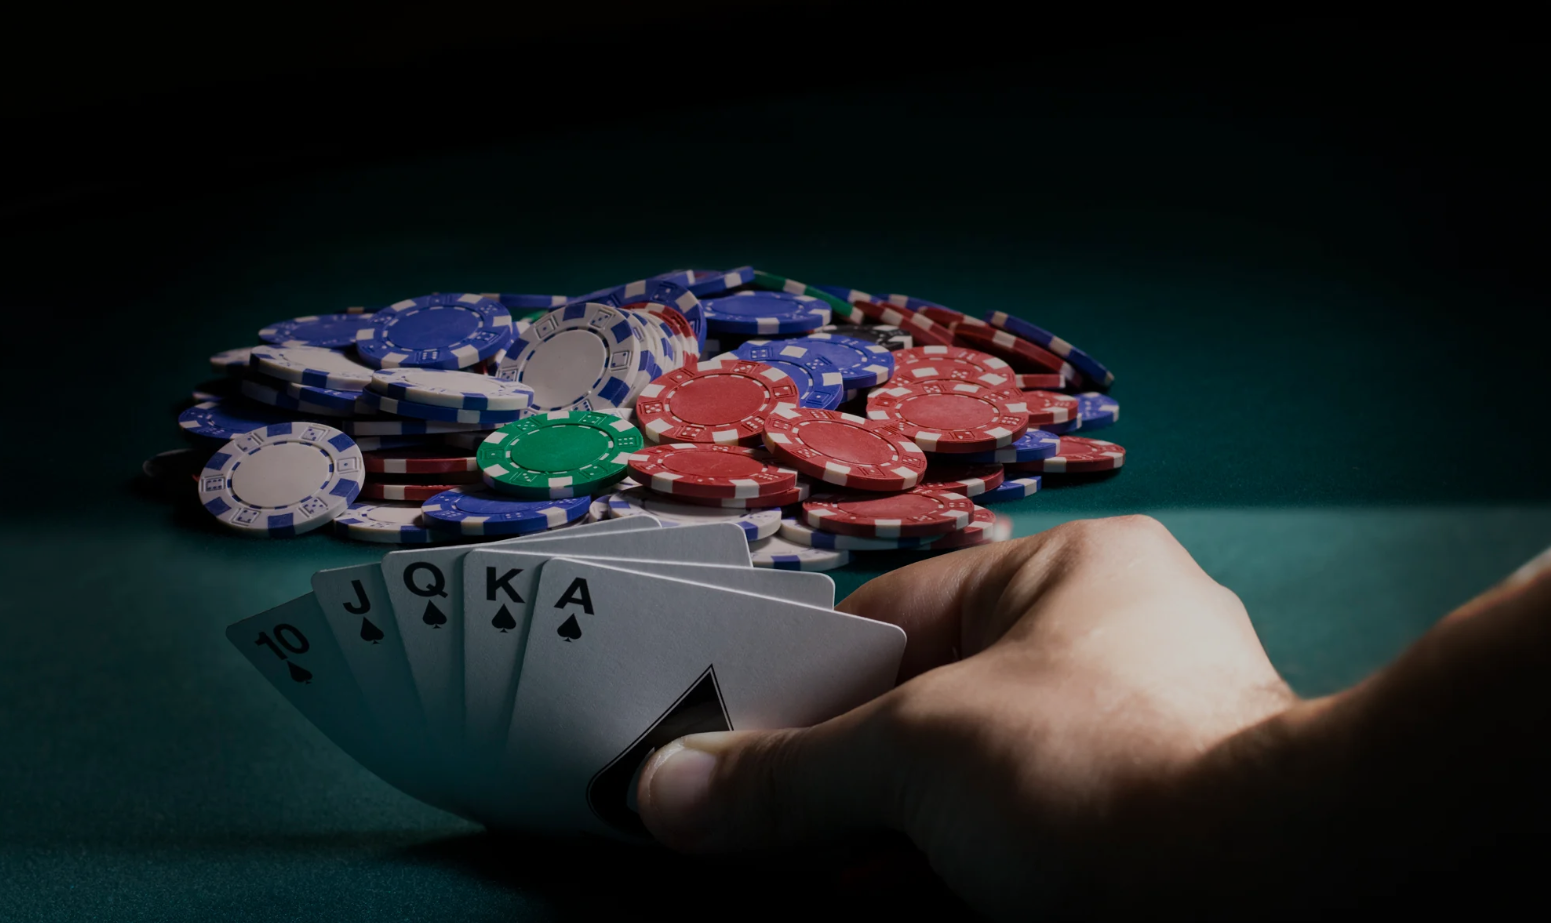 Best poker hand - strategy for the best poker combination